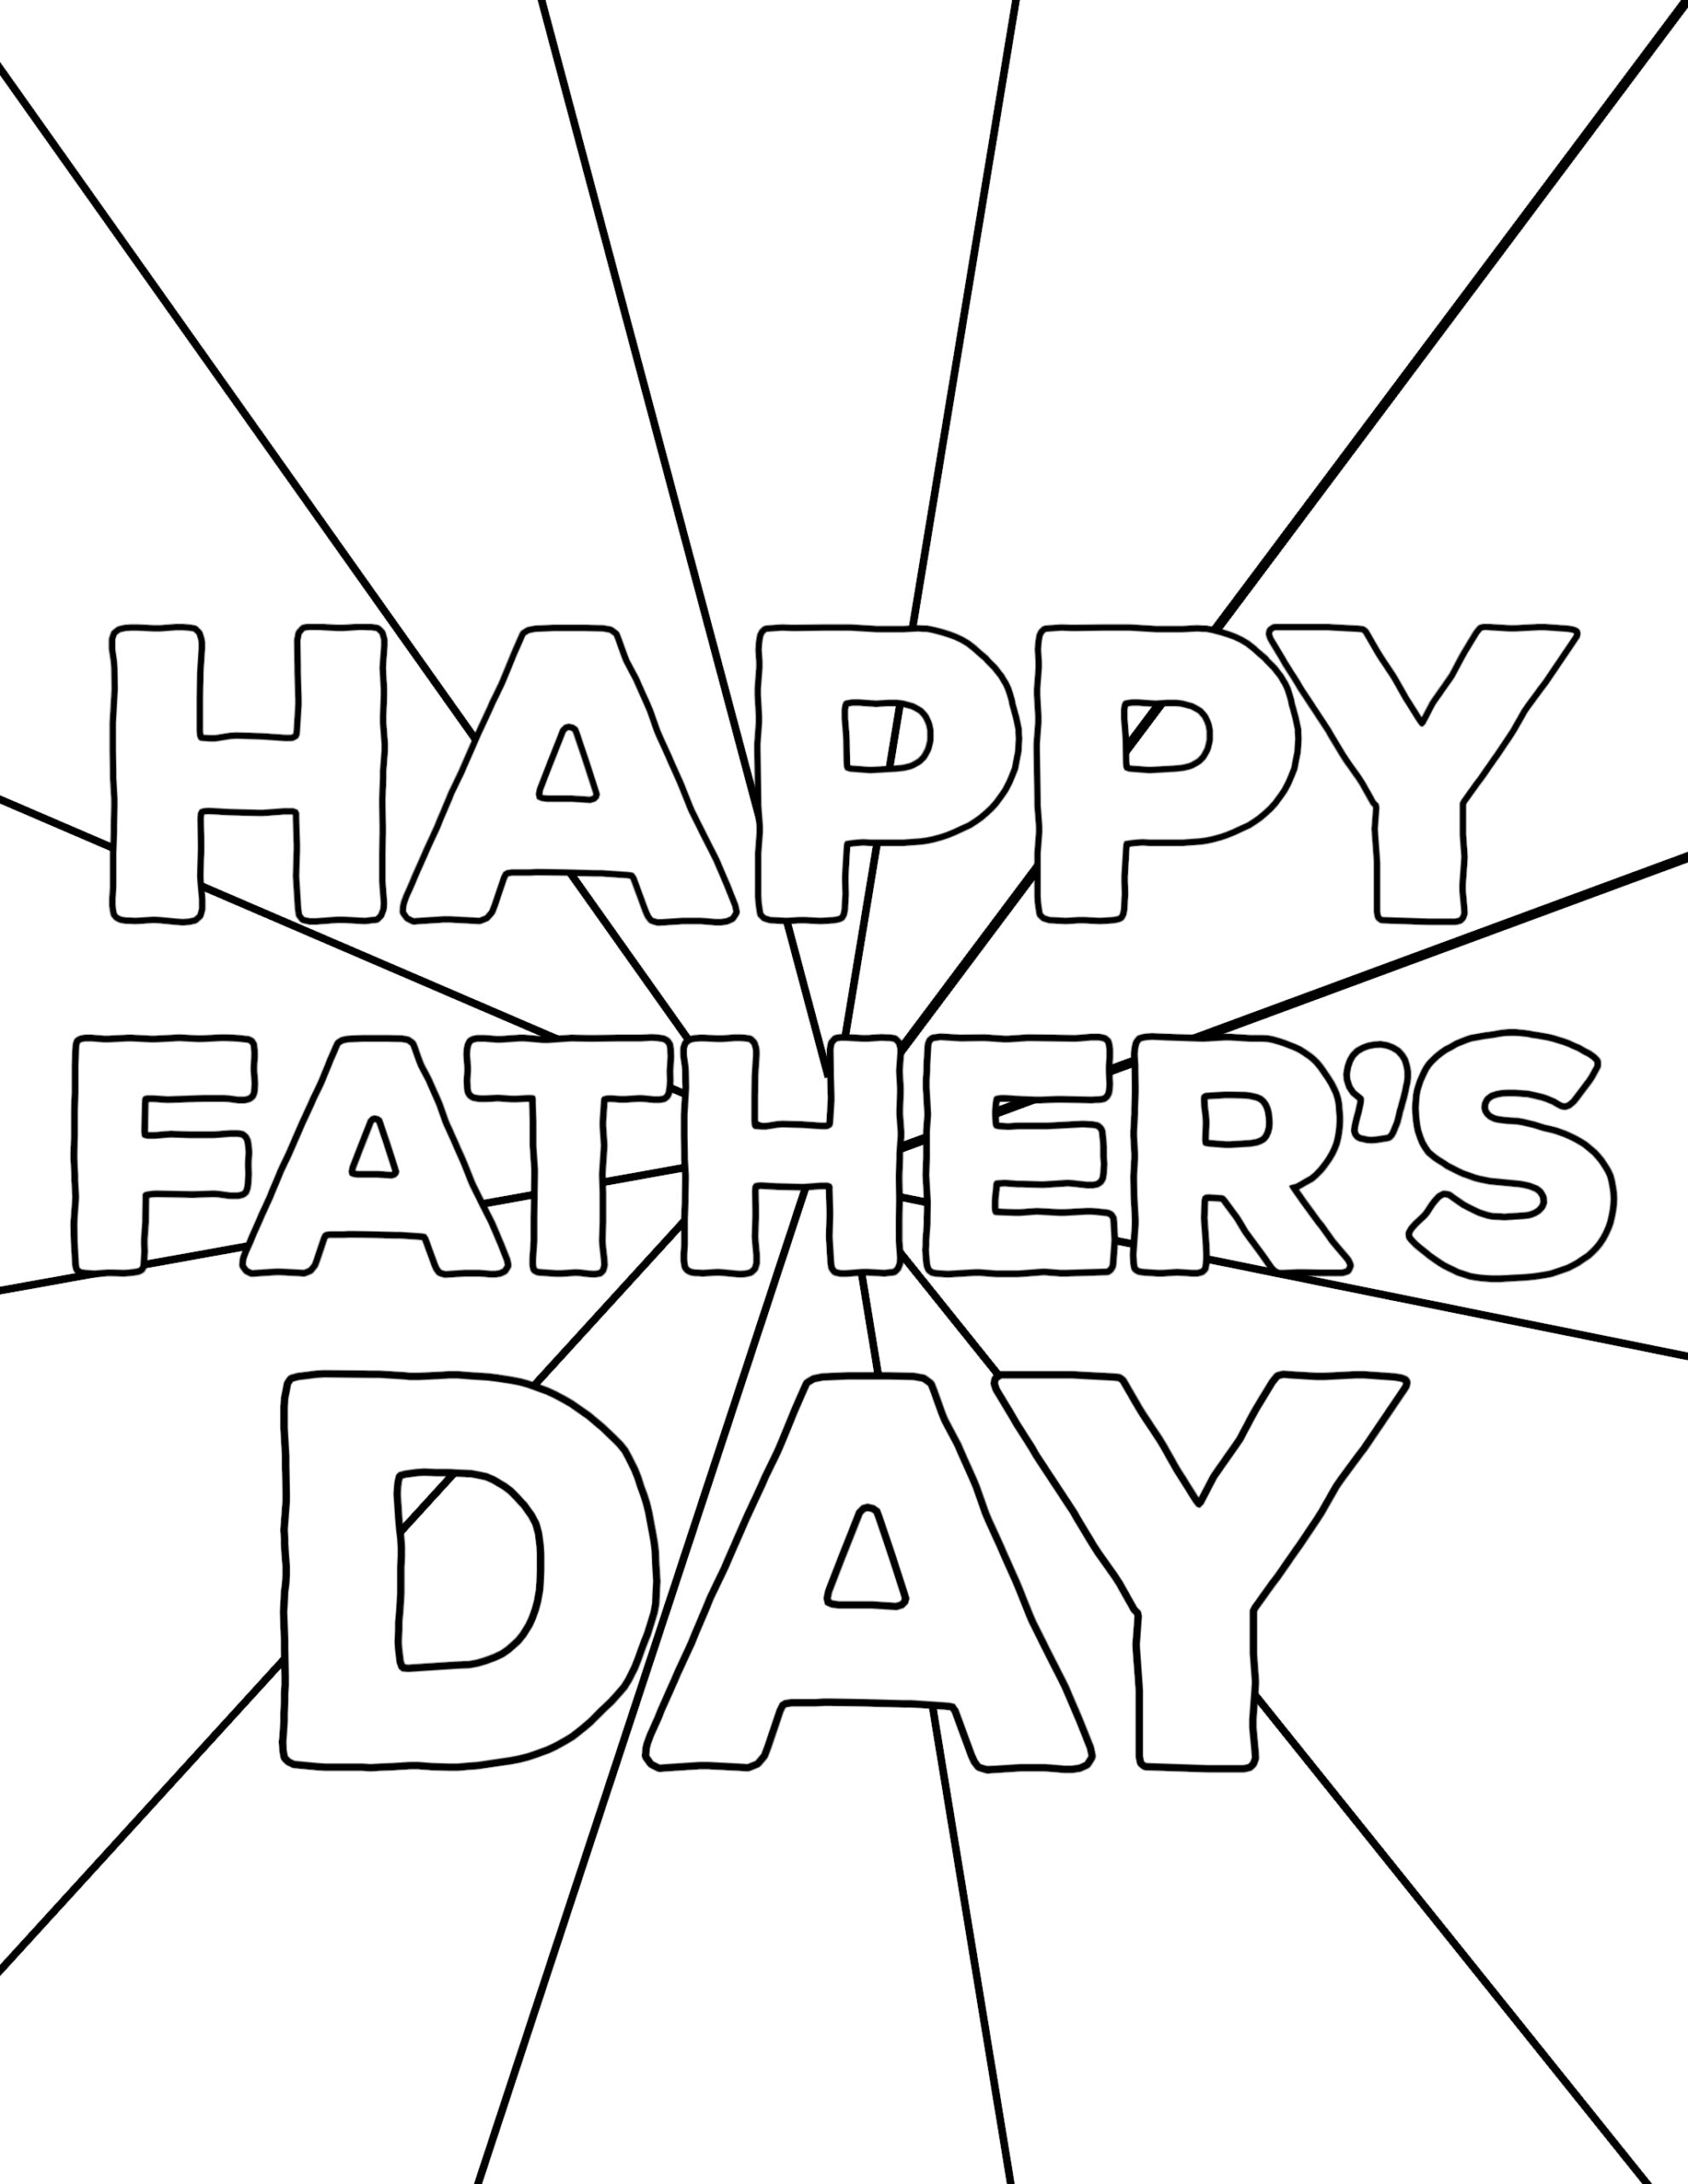 Happy Father's Day Coloring Pages Free Printables | Paper ...